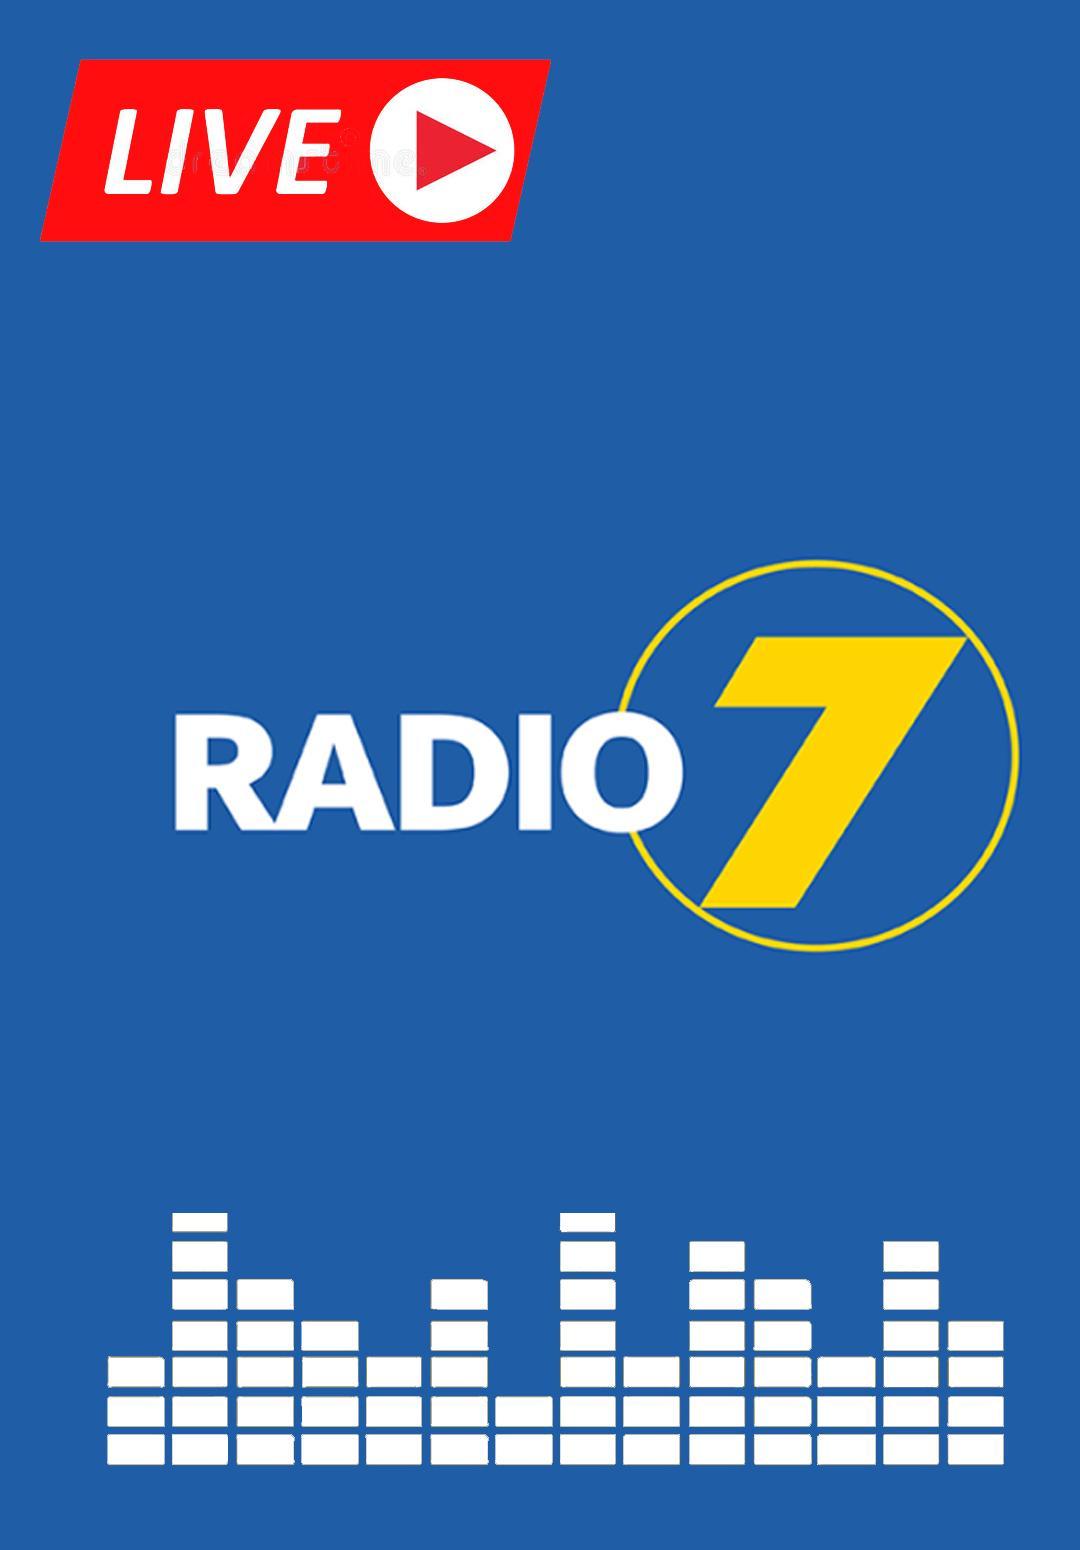 Radio 7 Live 24/7 for Android - APK Download